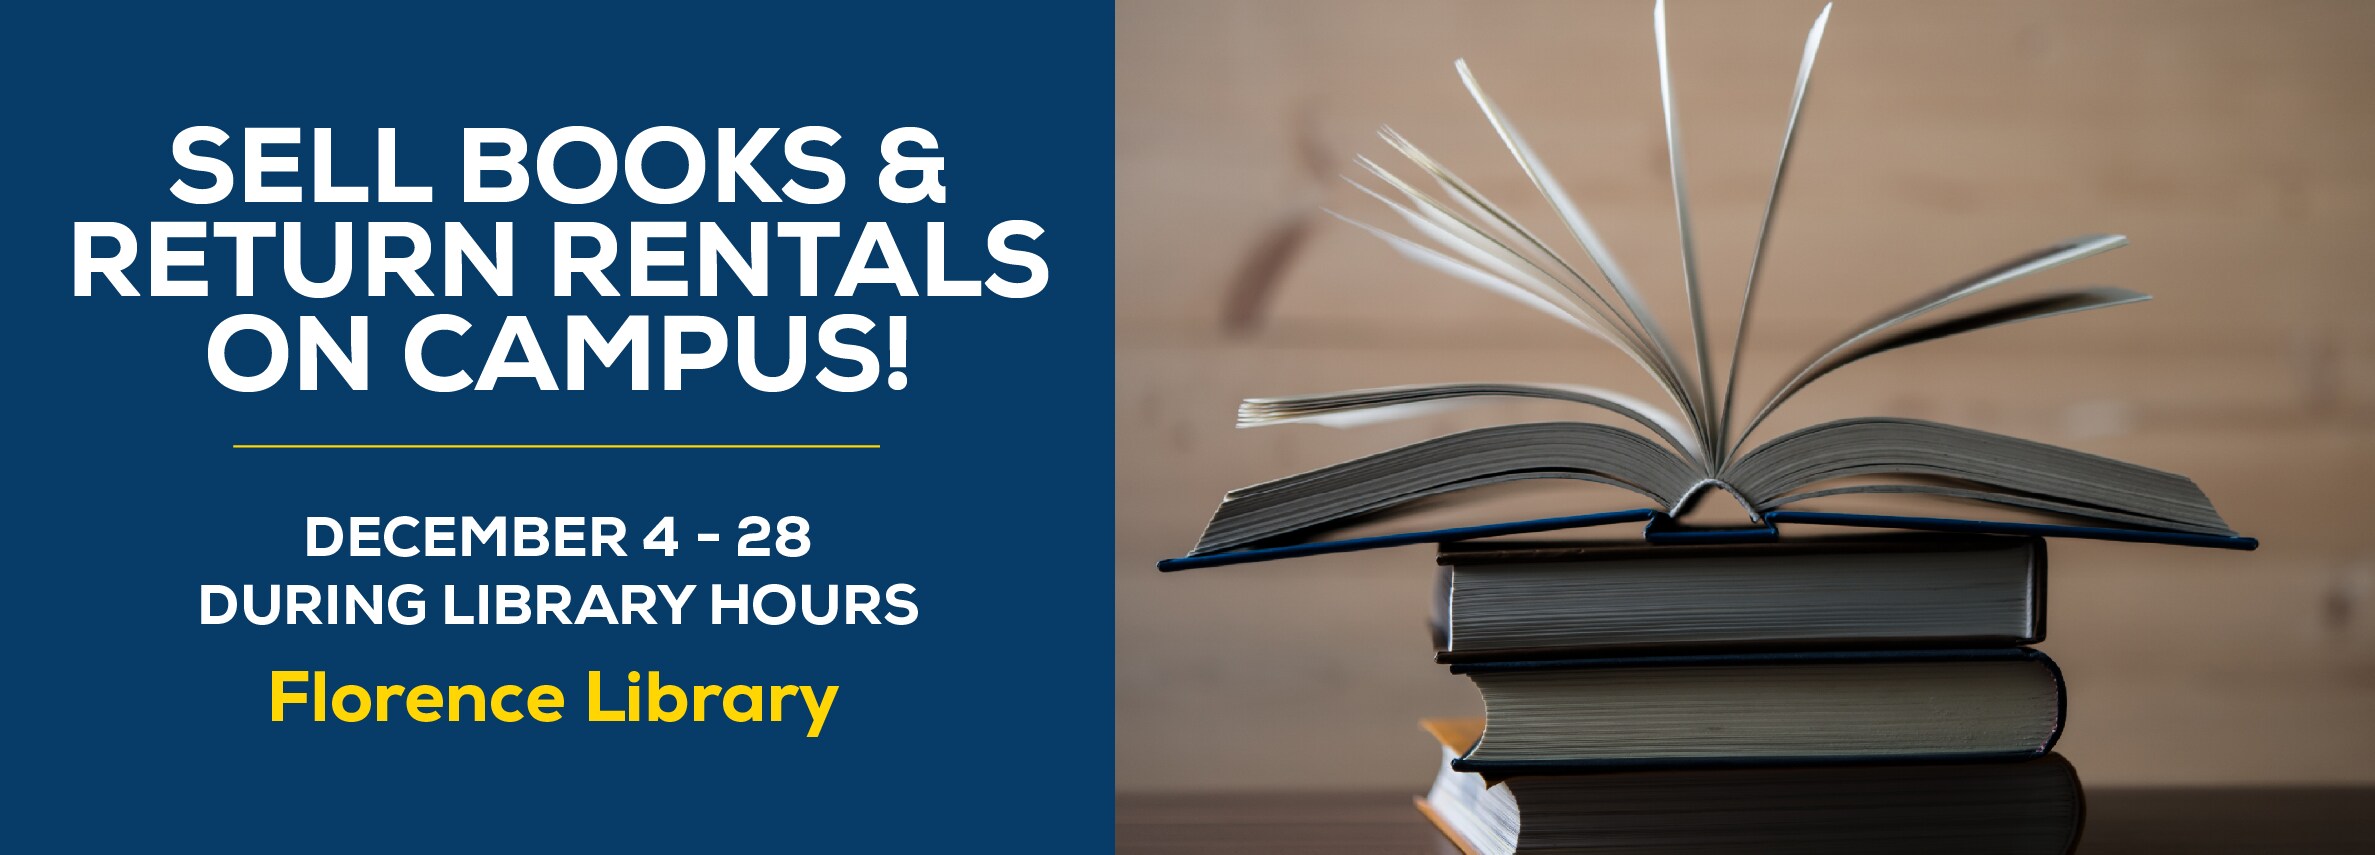 Sell Your Books & Return Your Rentals on campus! Florence Library. December 4 - 28. During Library Hours